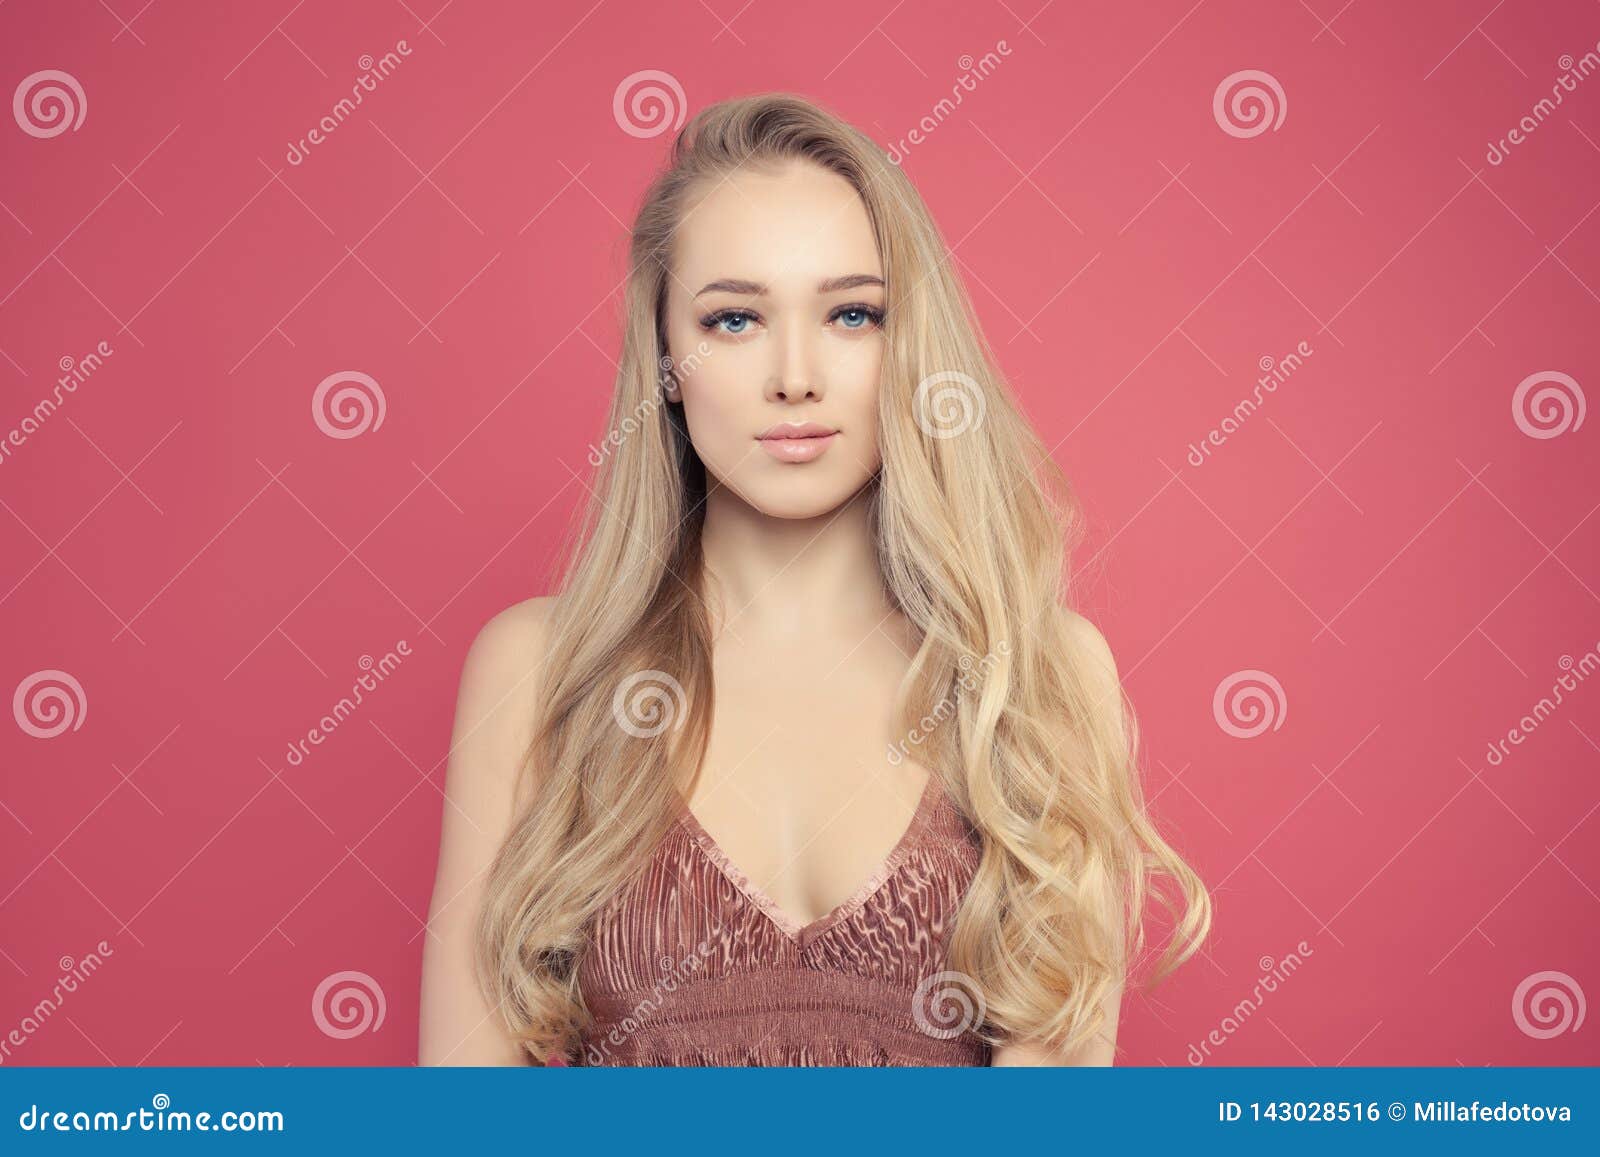 Young Woman With Long Blonde Hair And Natural Makeup Portrait